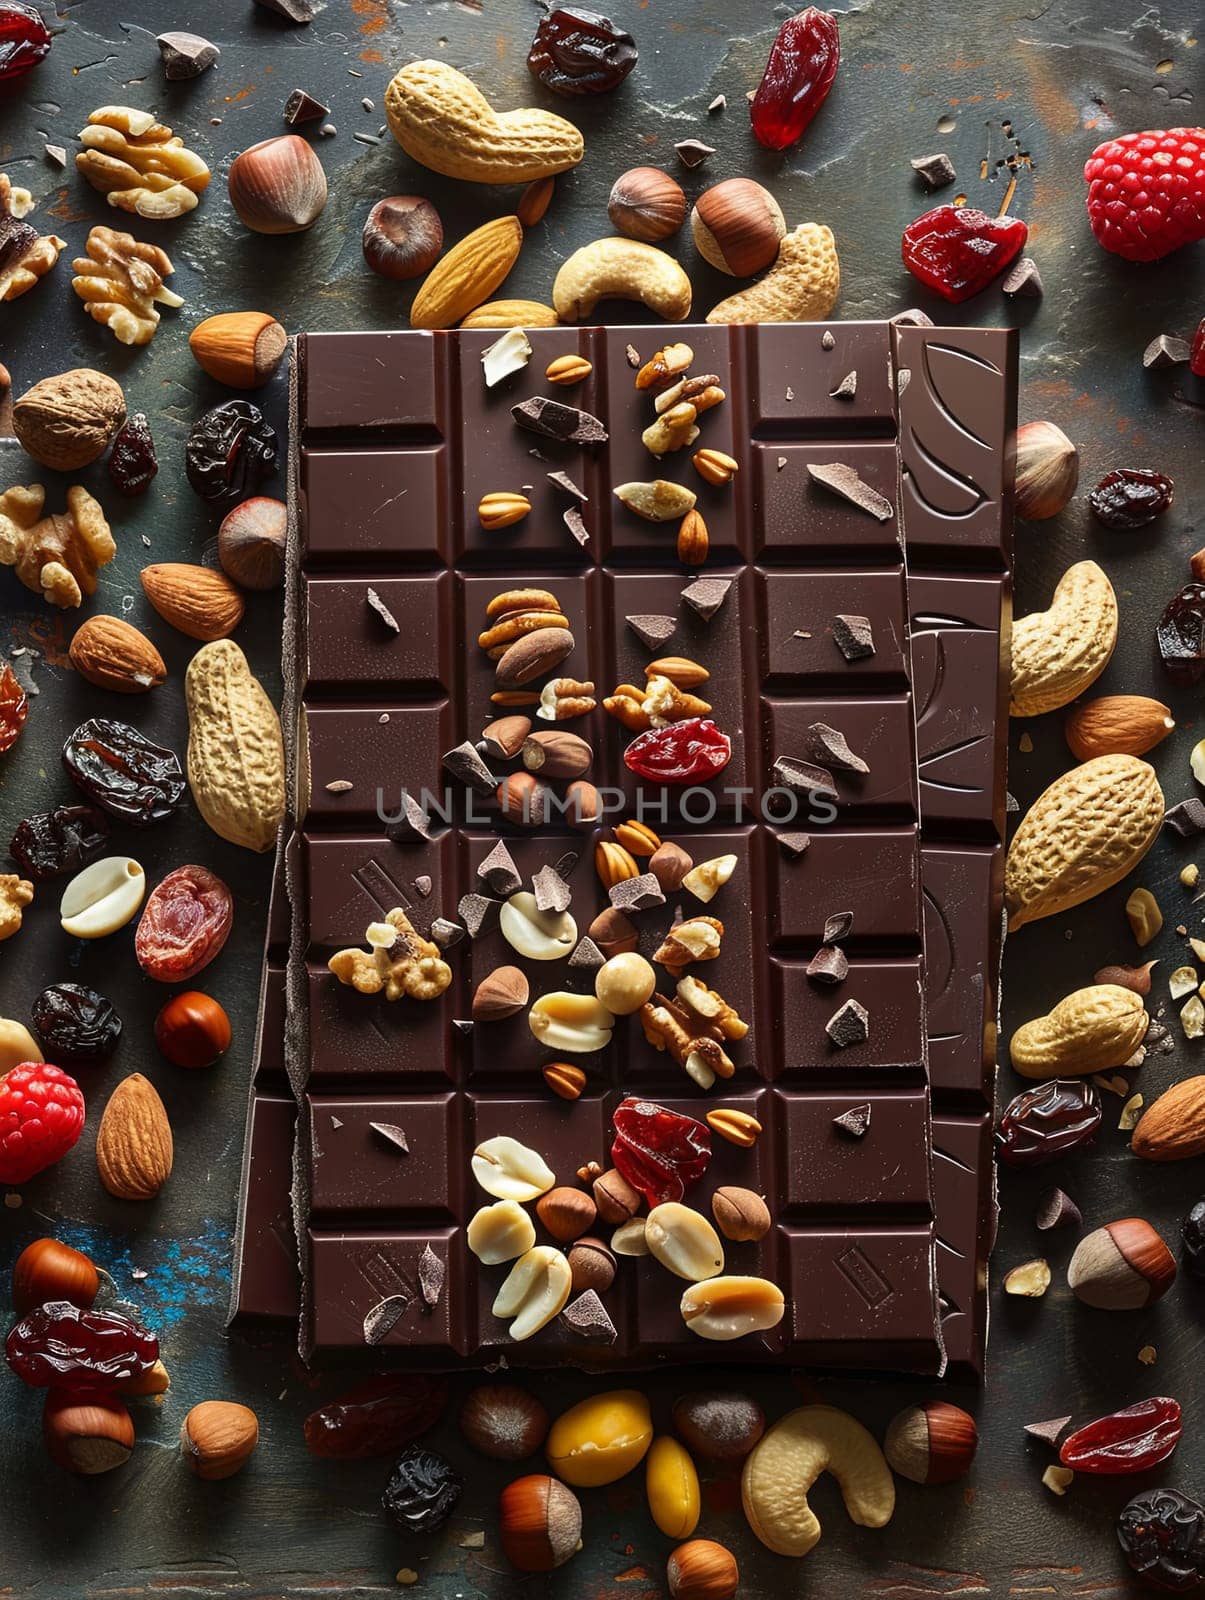 A chocolate bar adorned with an assortment of nuts, raspberries, and almonds creating a delectable and textured display.